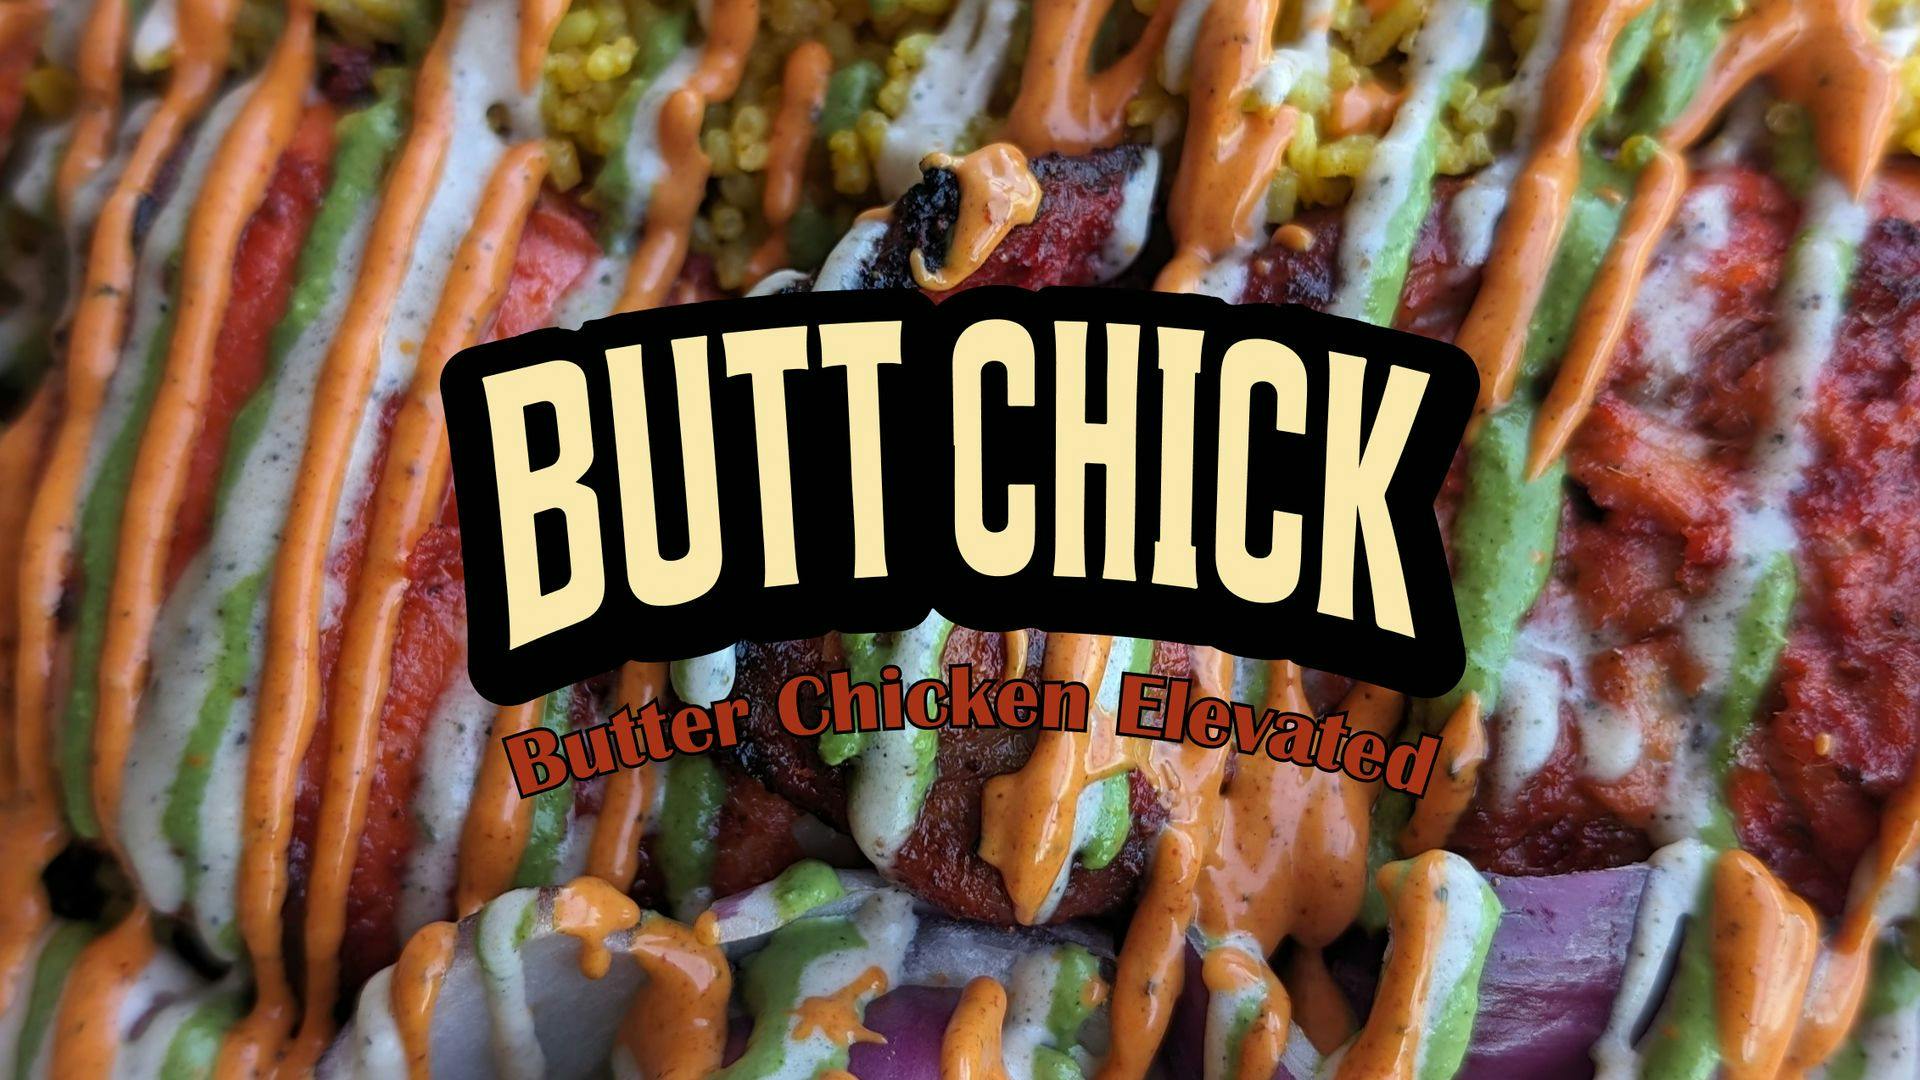 ButtChick | Butter Chicken Elevated! cover image